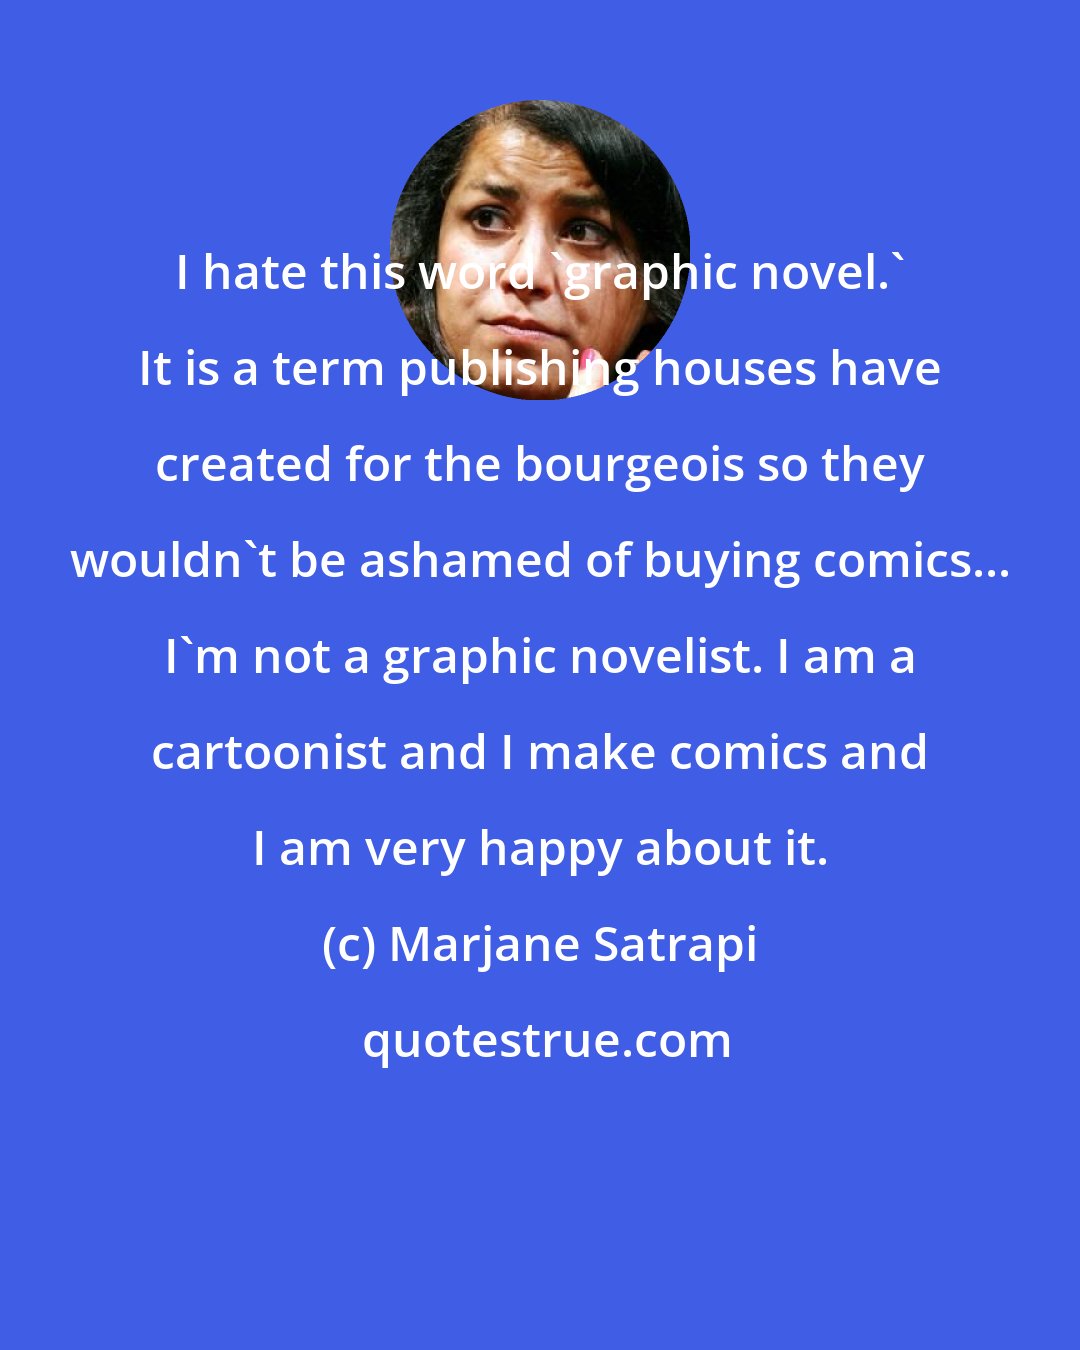 Marjane Satrapi: I hate this word 'graphic novel.' It is a term publishing houses have created for the bourgeois so they wouldn't be ashamed of buying comics... I'm not a graphic novelist. I am a cartoonist and I make comics and I am very happy about it.